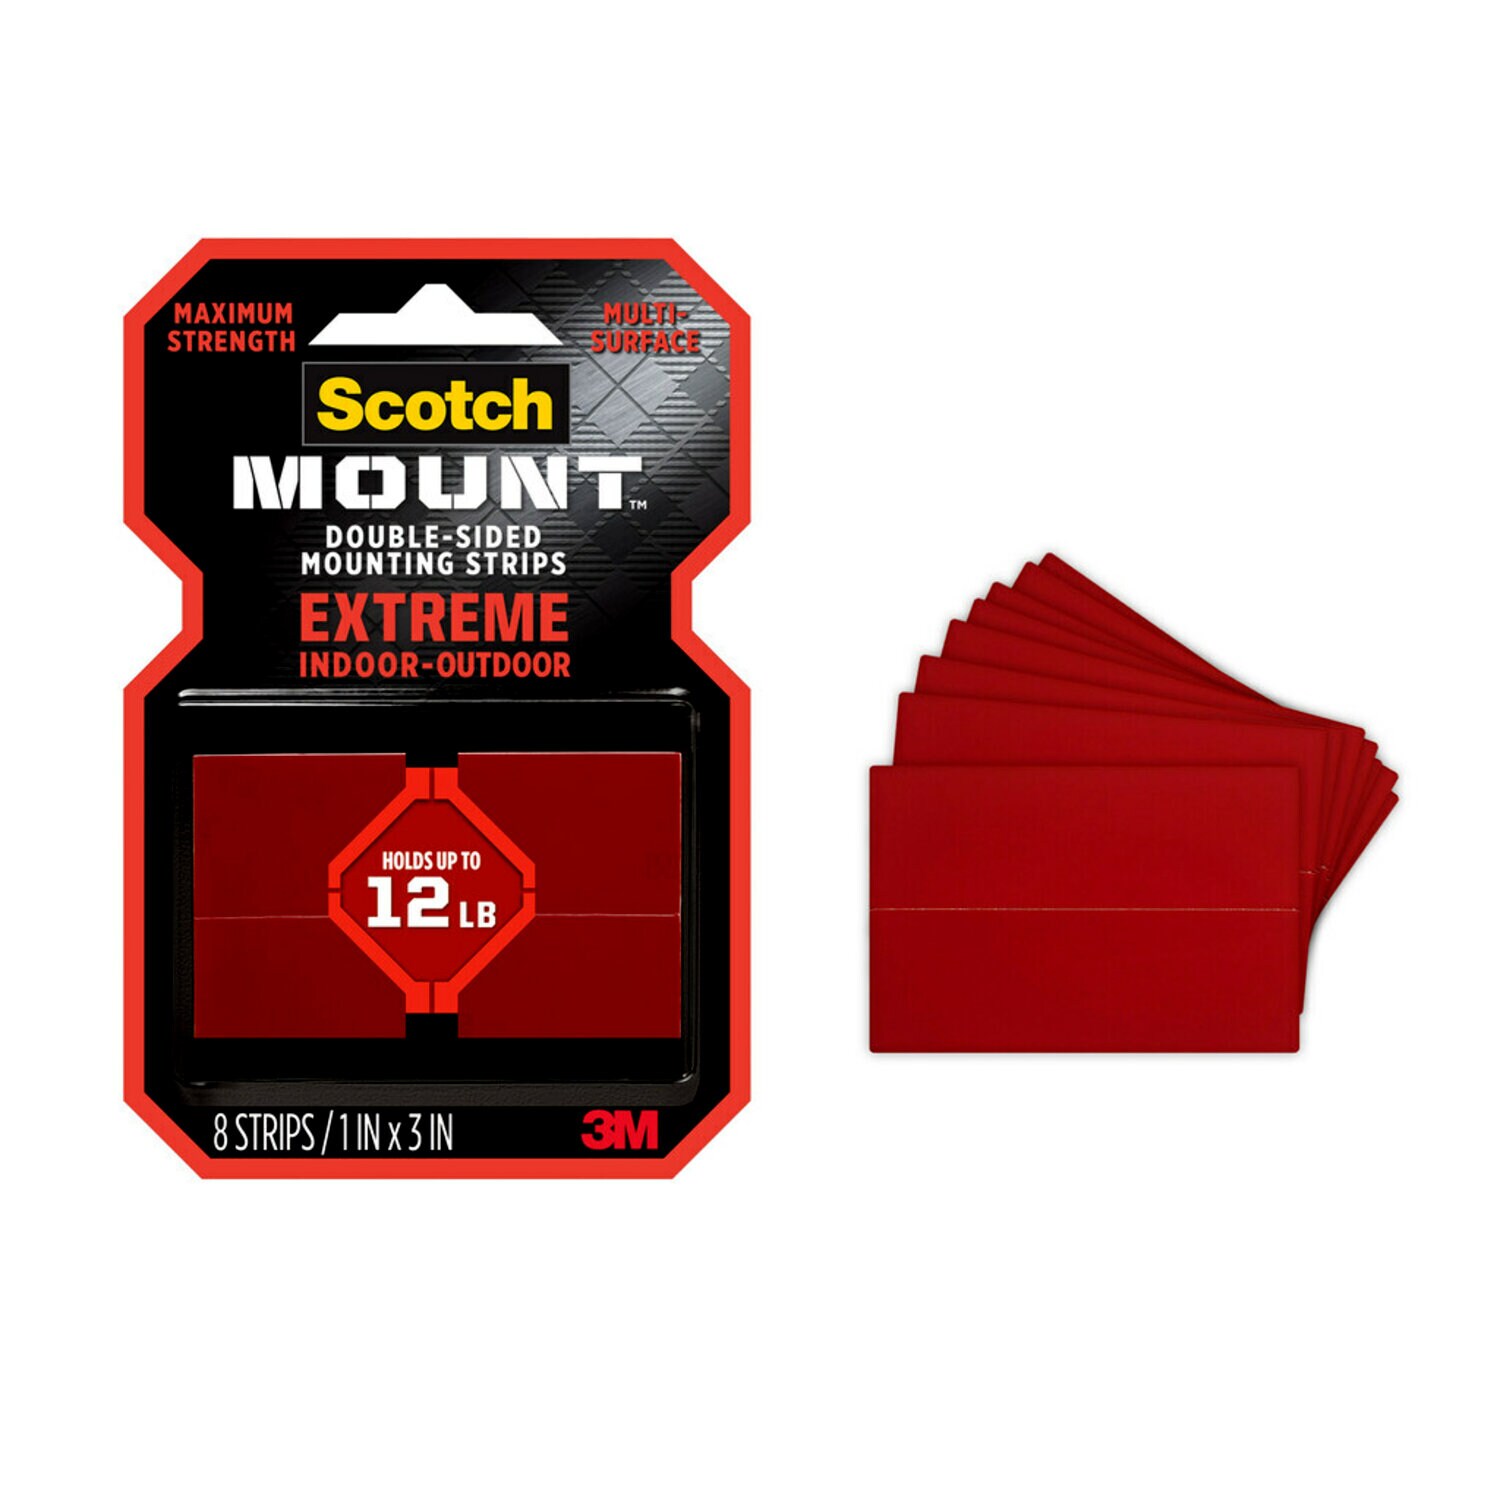 7100216166 - Scotch-Mount Extreme Double-Sided Mounting Strips 414H-ST, 1 in x 3 in (2,54 cm x 7,62 cm) EA, 8 Strips